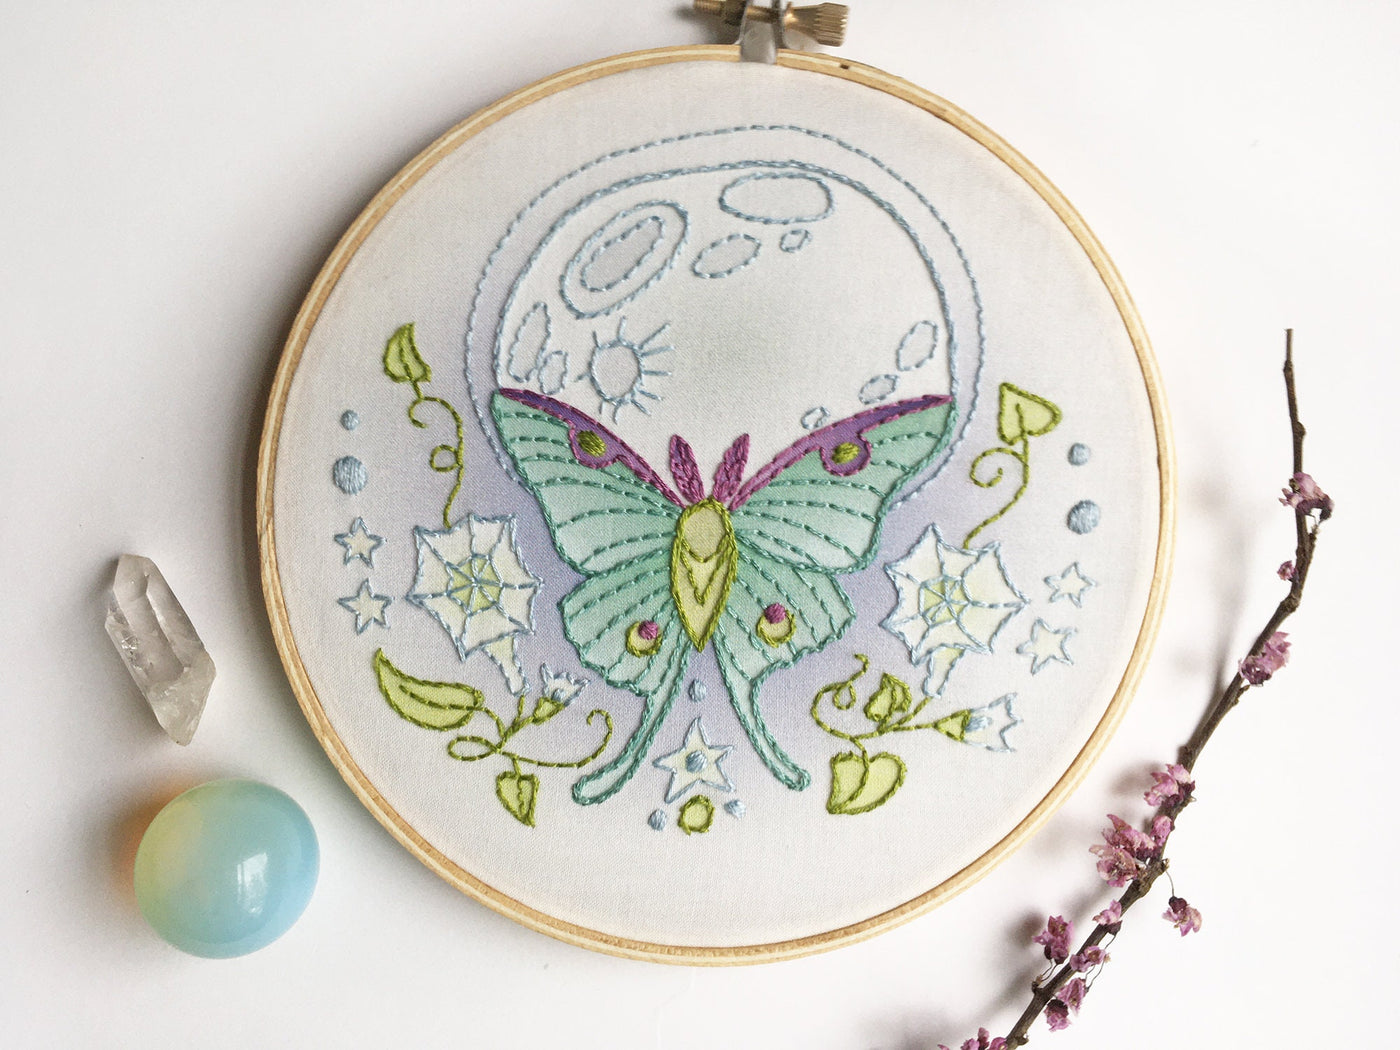 Luna Moth Butterfly Moon hand embroidery pattern download